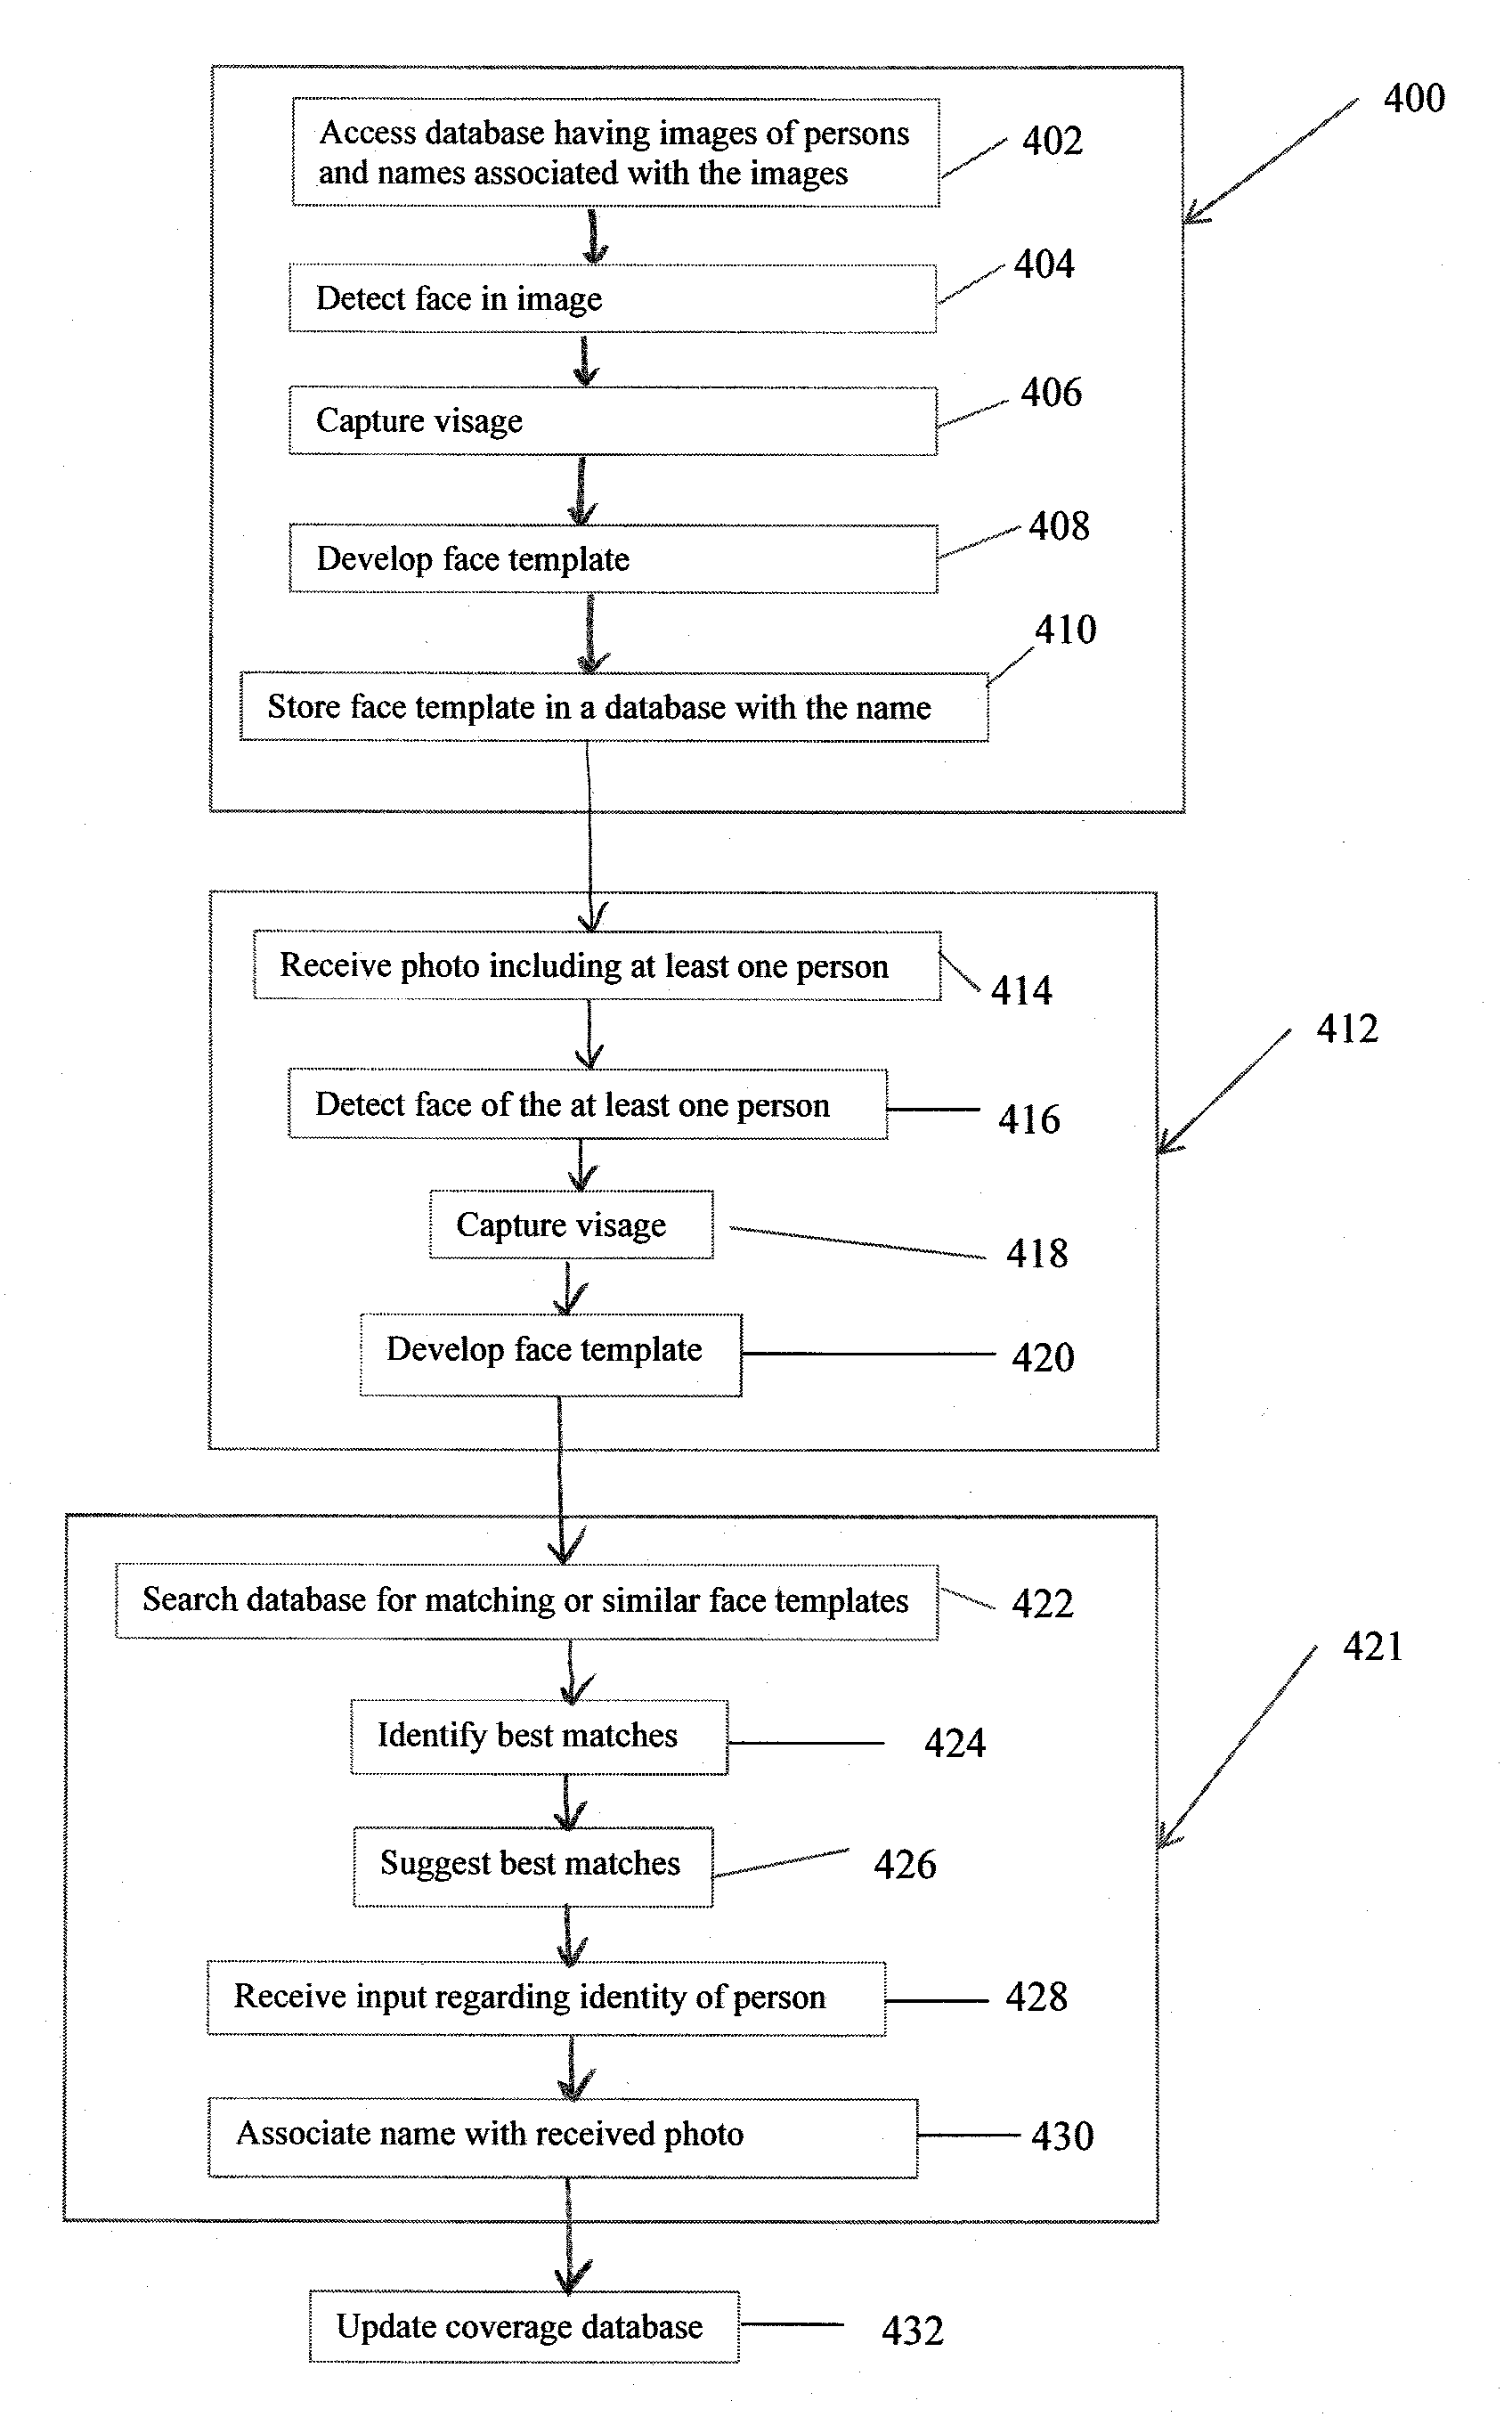 System and method for yearbook creation